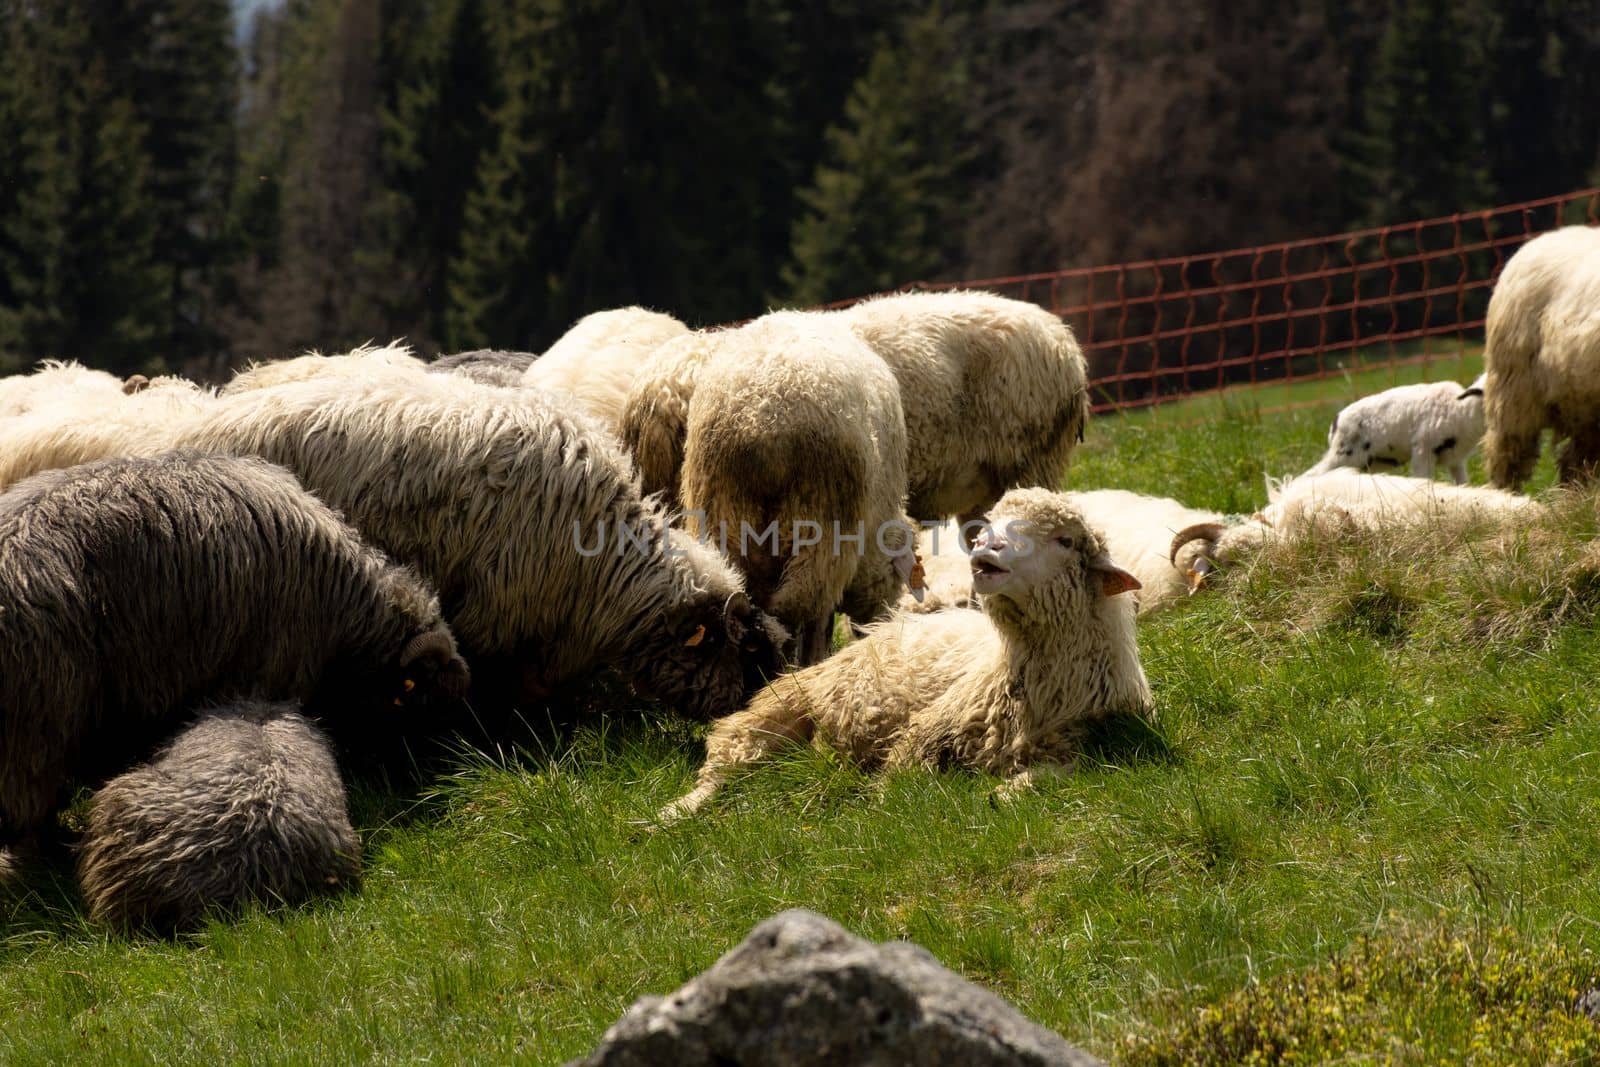 Flock of sheep grazing in meadow in with the Tatra Mountains behind, in Poland. High quality photo